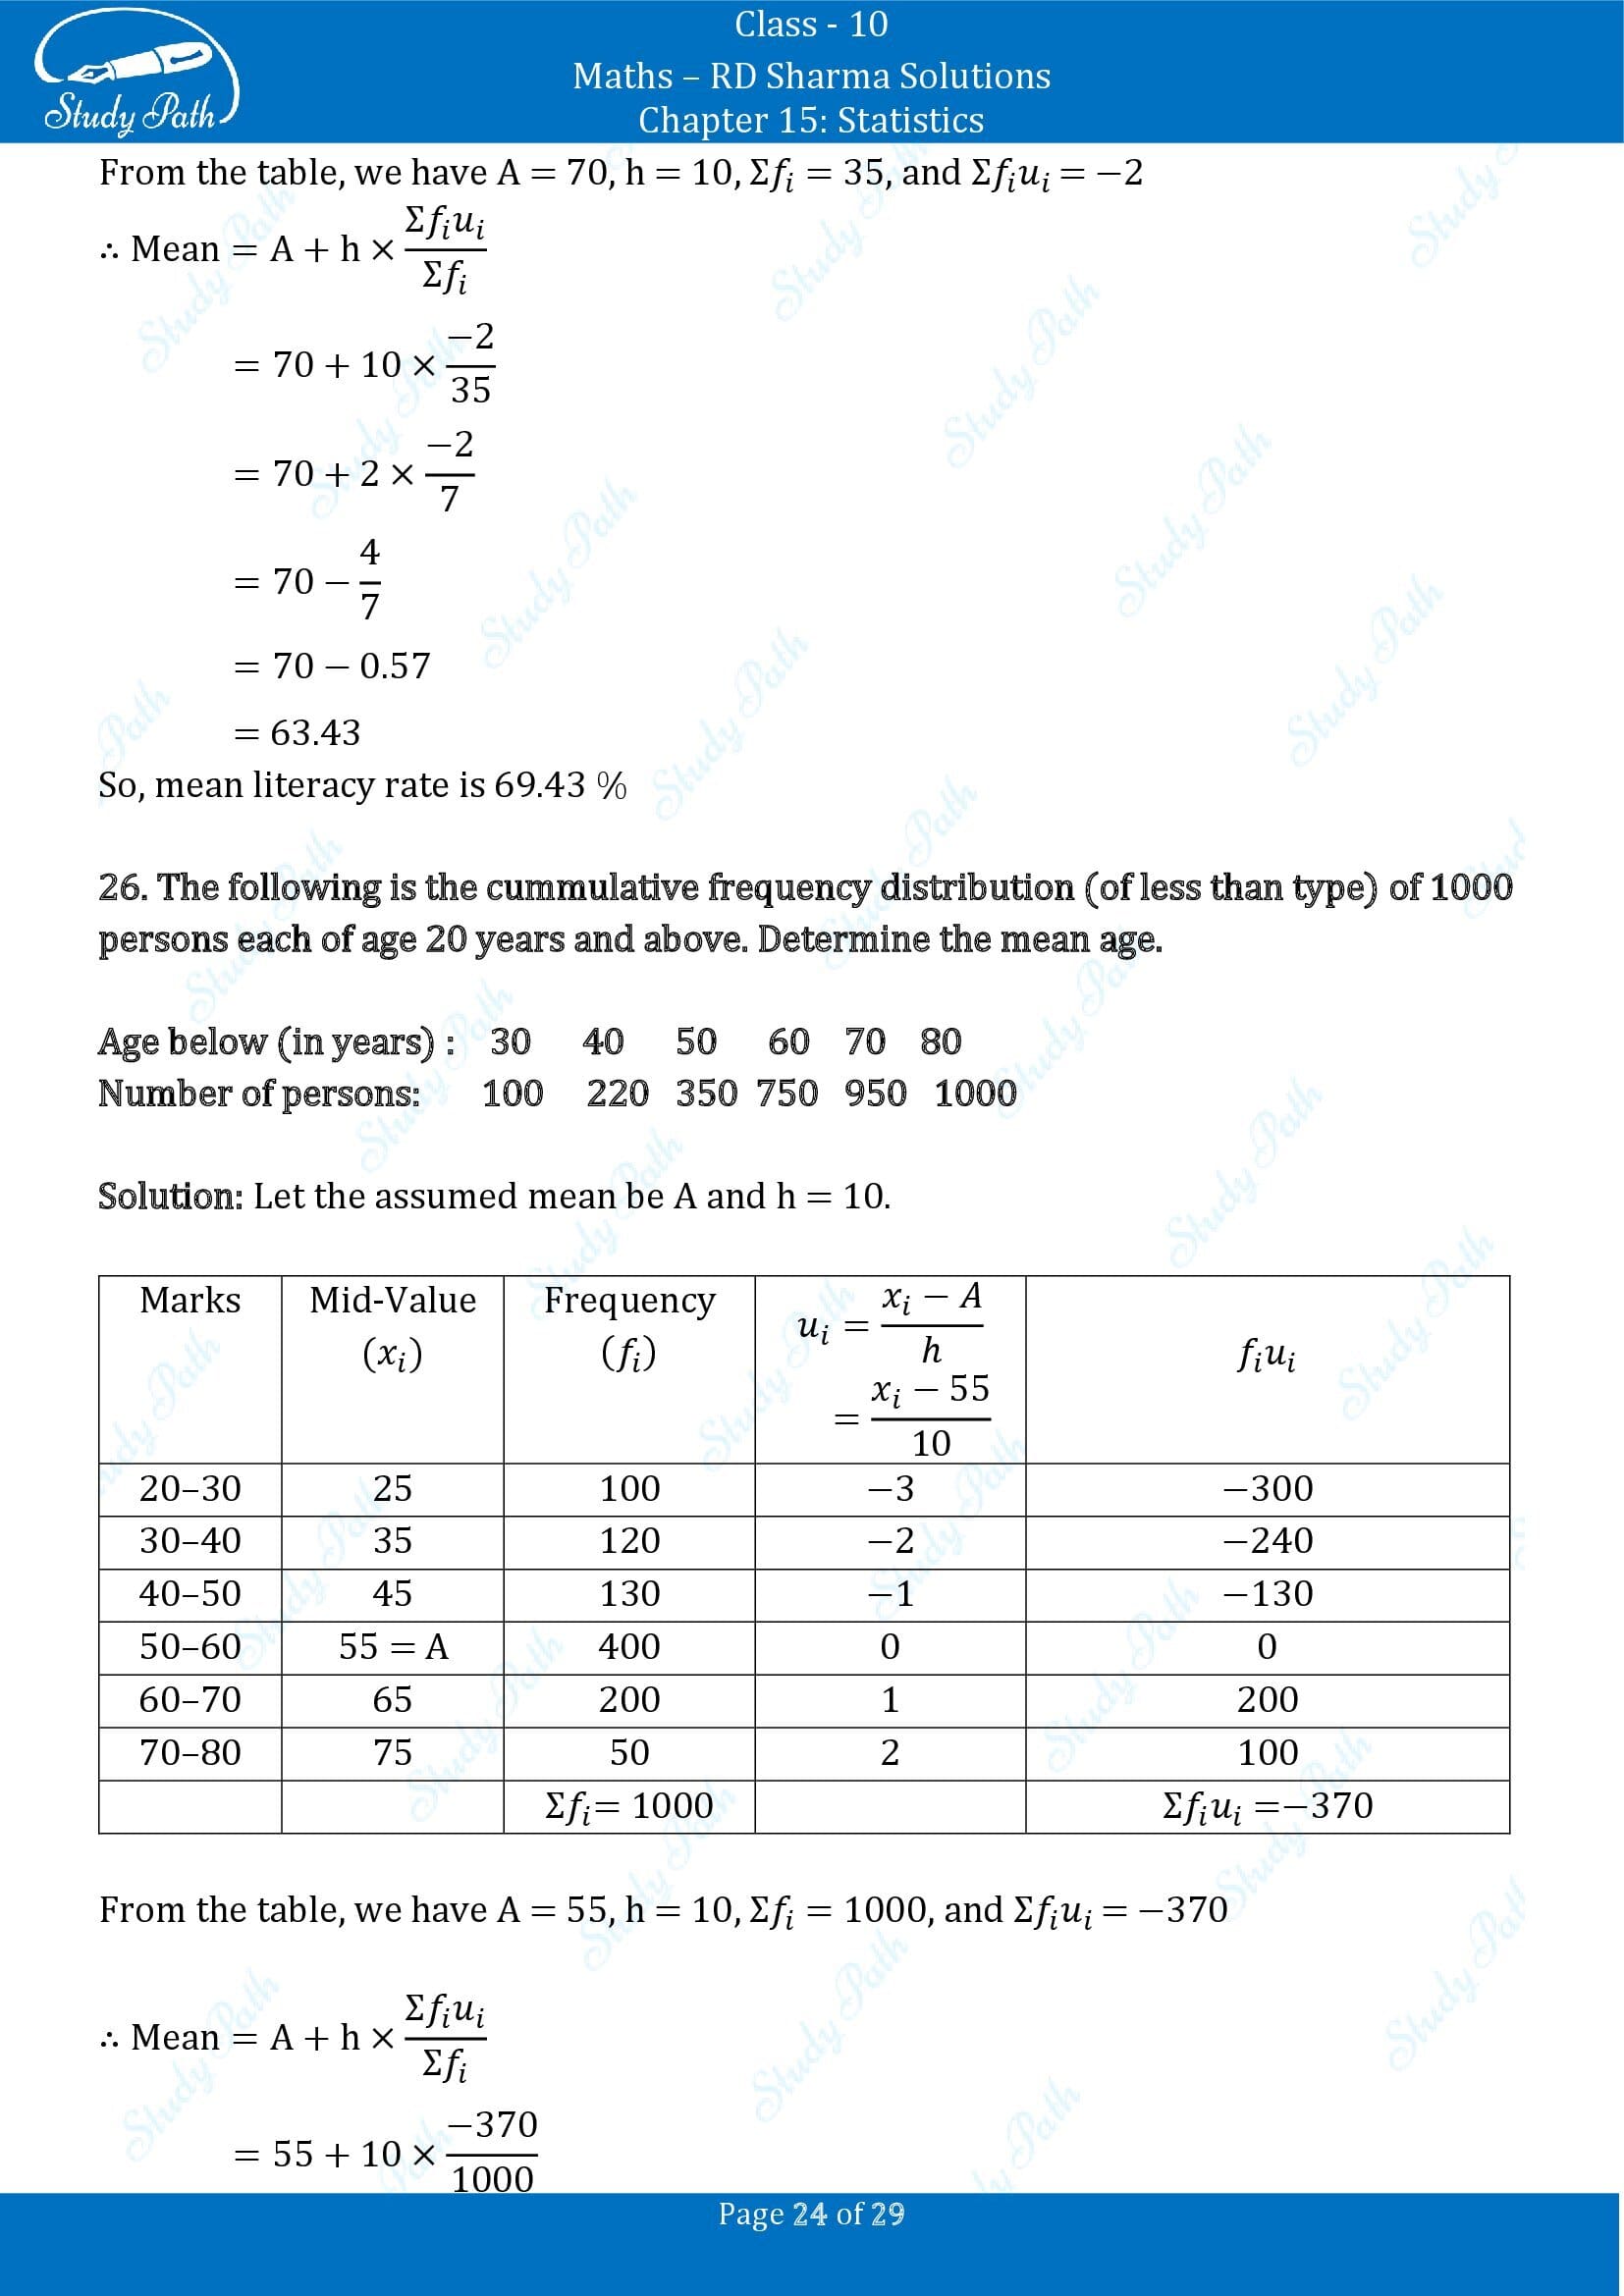 RD Sharma Solutions Class 10 Chapter 15 Statistics Exercise 15.3 0024